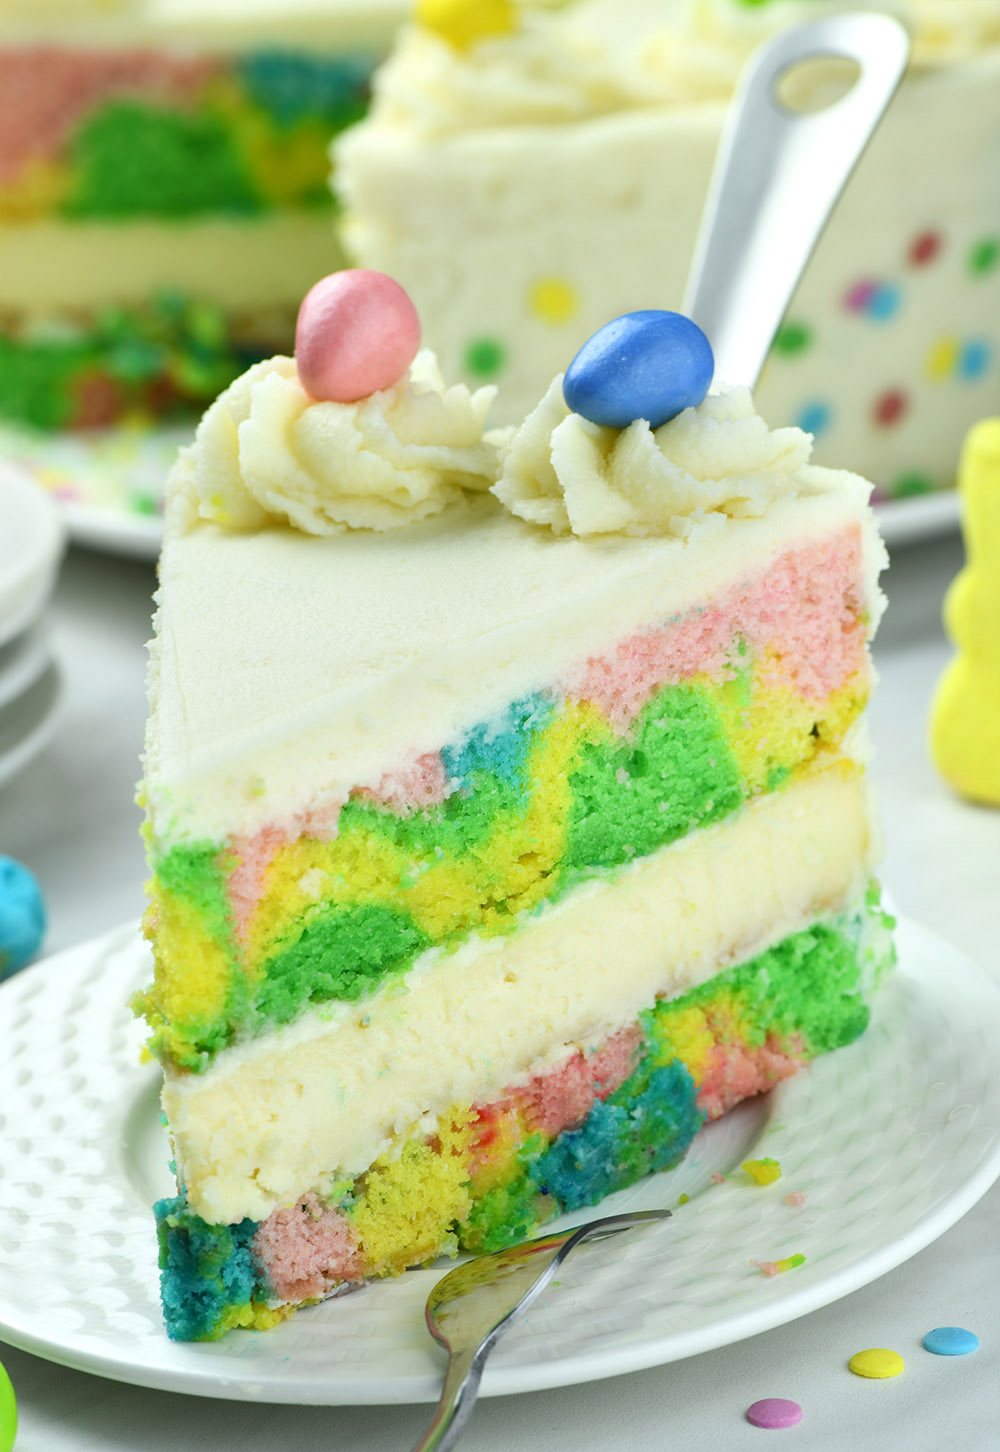 Smooth and creamy white chocolate cheesecake hidden between colourful cake layers and white chocolate buttercream on a white plate , decorated with frosting and Easter eggs.